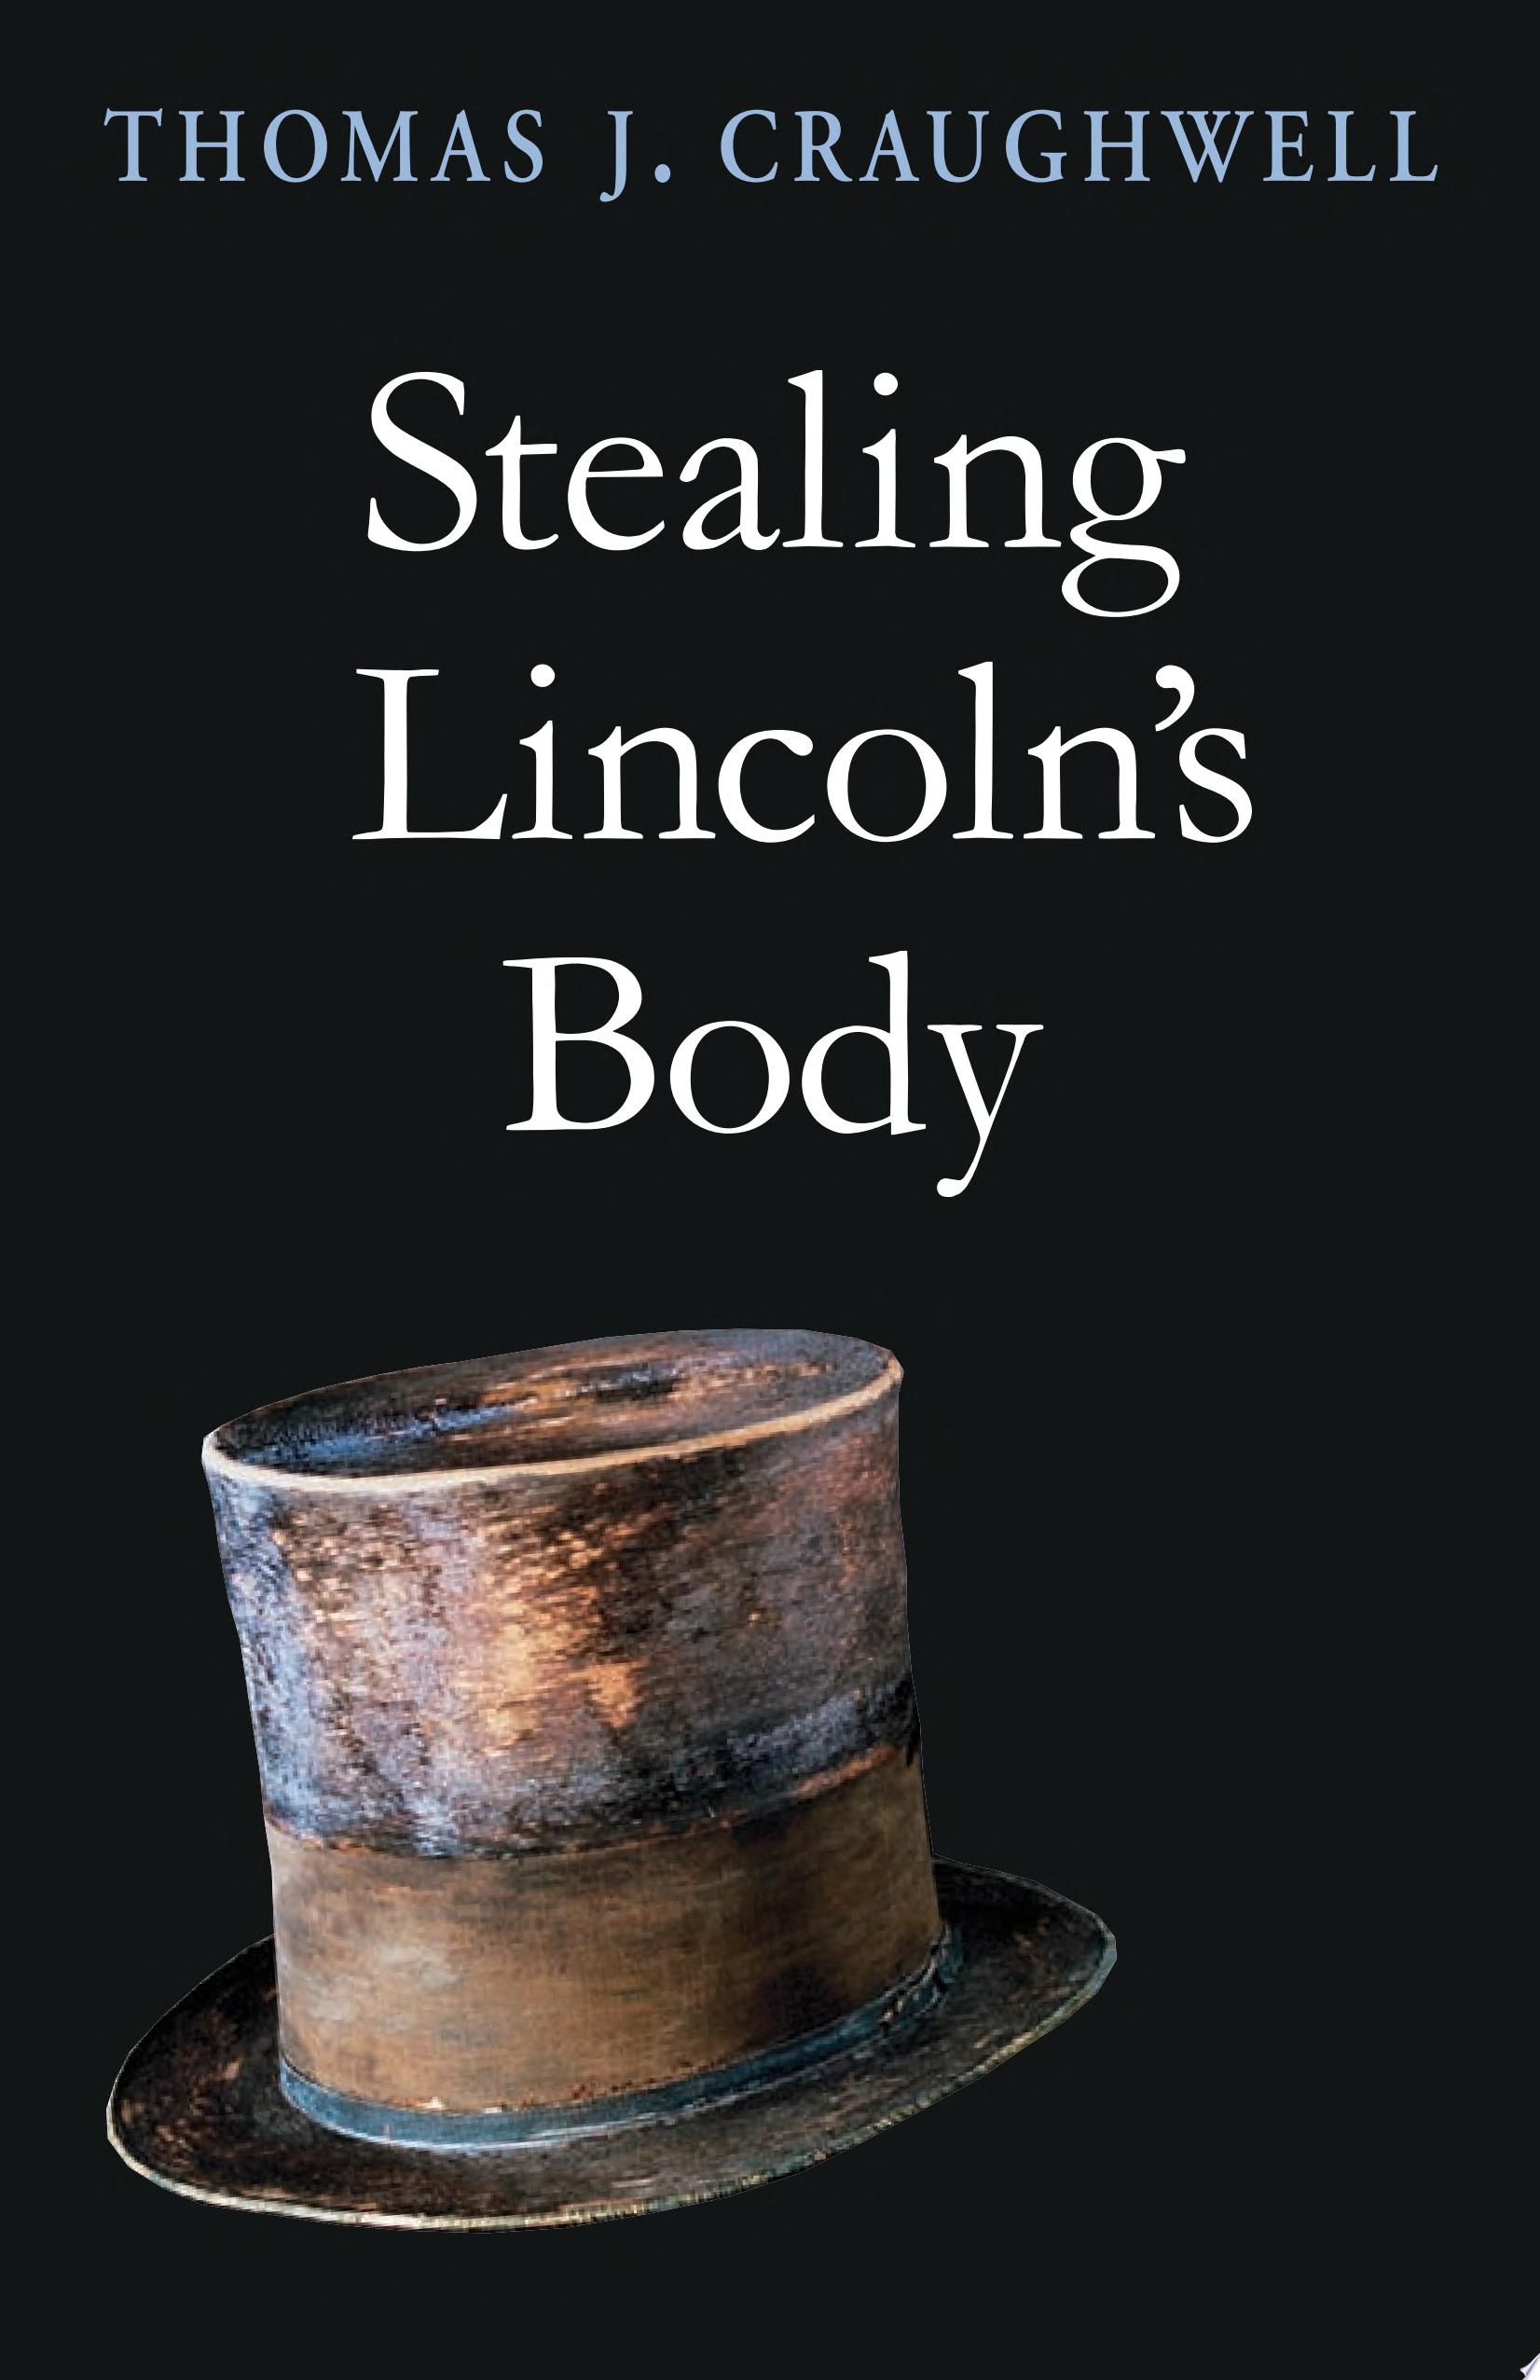 Image for "Stealing Lincoln’s Body"